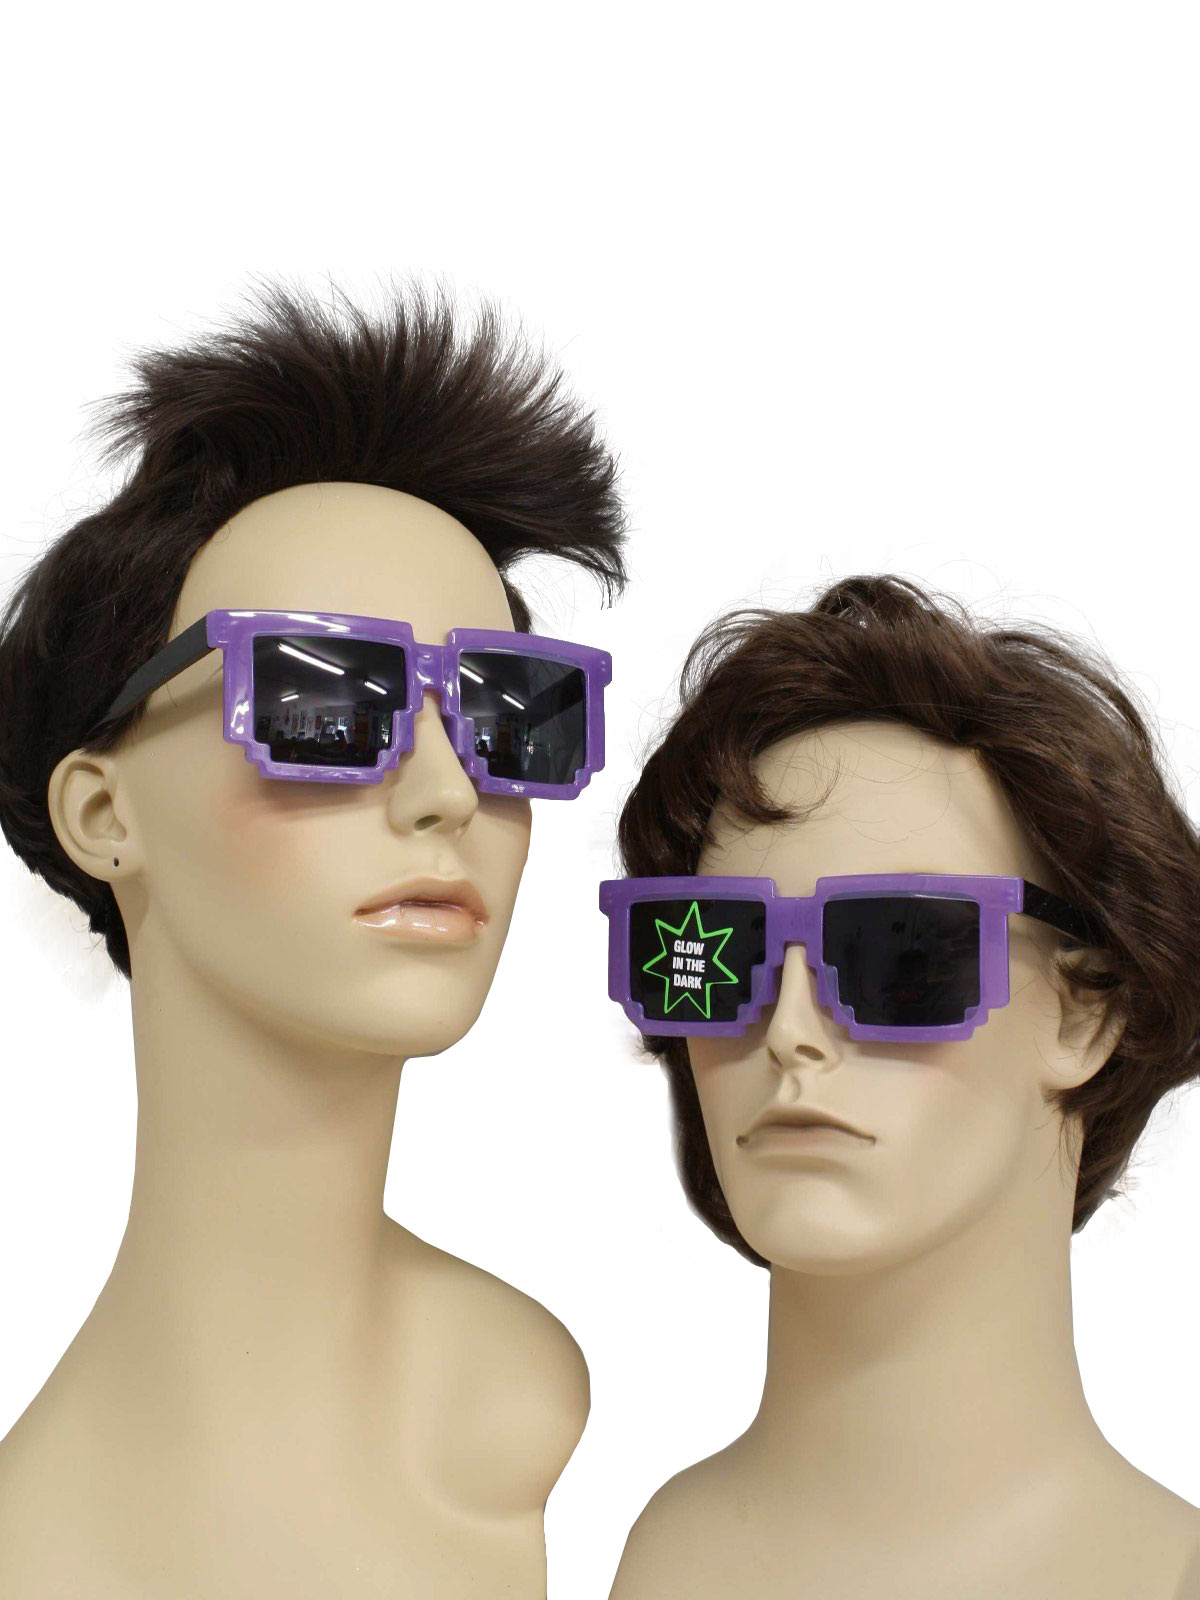 1980s Glasses 8 Bit Totally 80s Look Retro Sunglasses 80s Style Made Recently 8 Bit